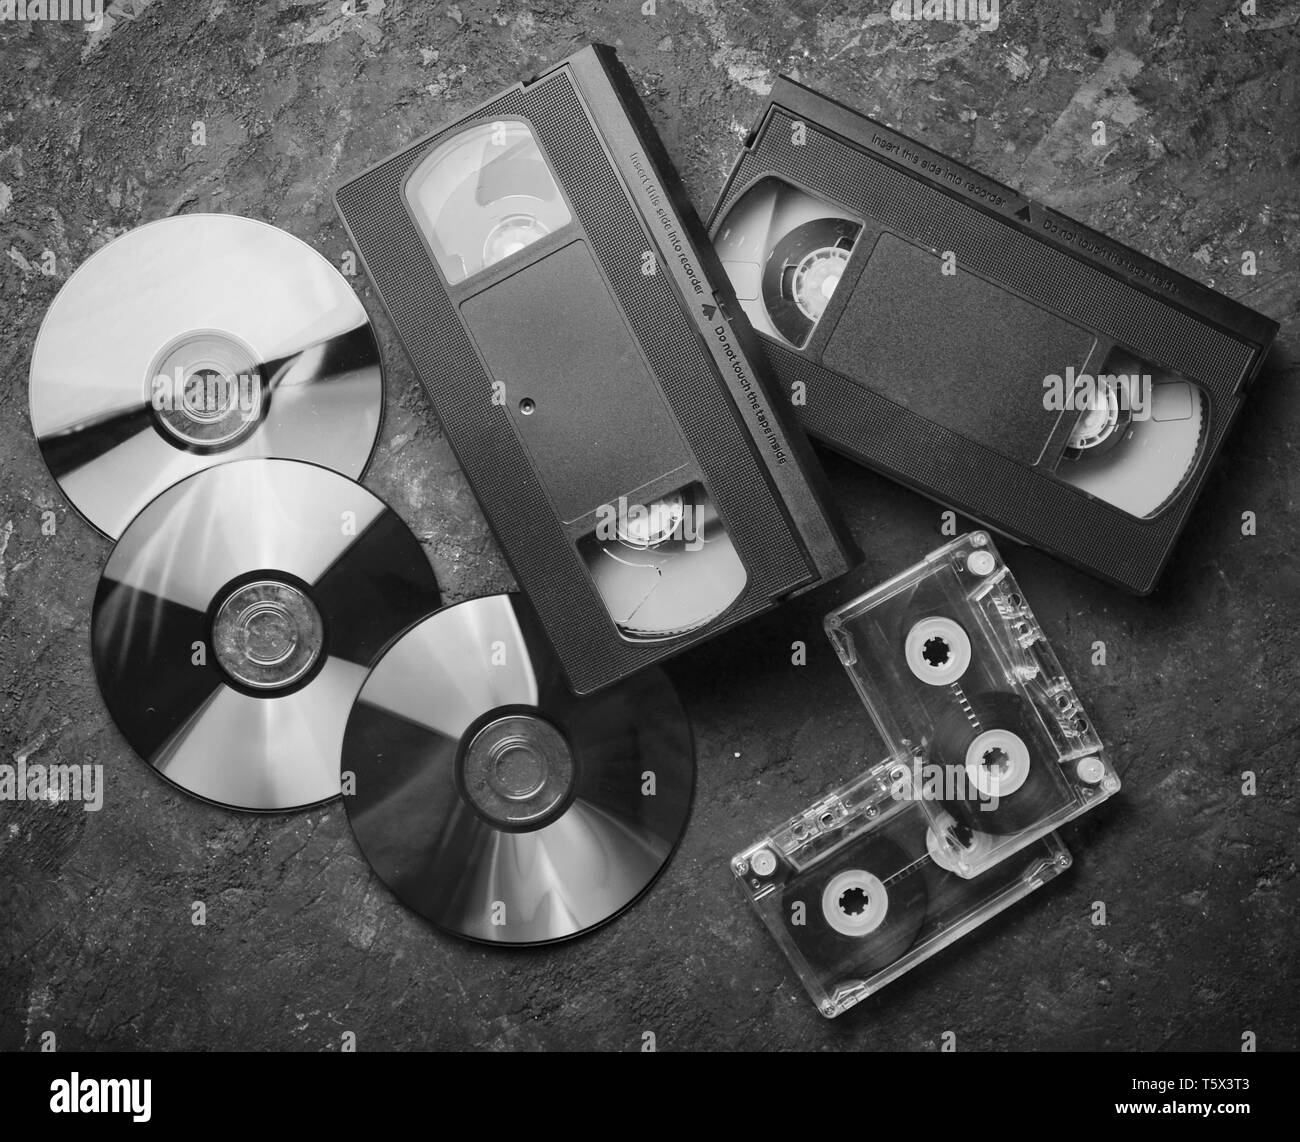 Entertainment and media technology from the 90s. CD's, audio cassettes, video cassettes on a black concrete surface. Top view. Stock Photo